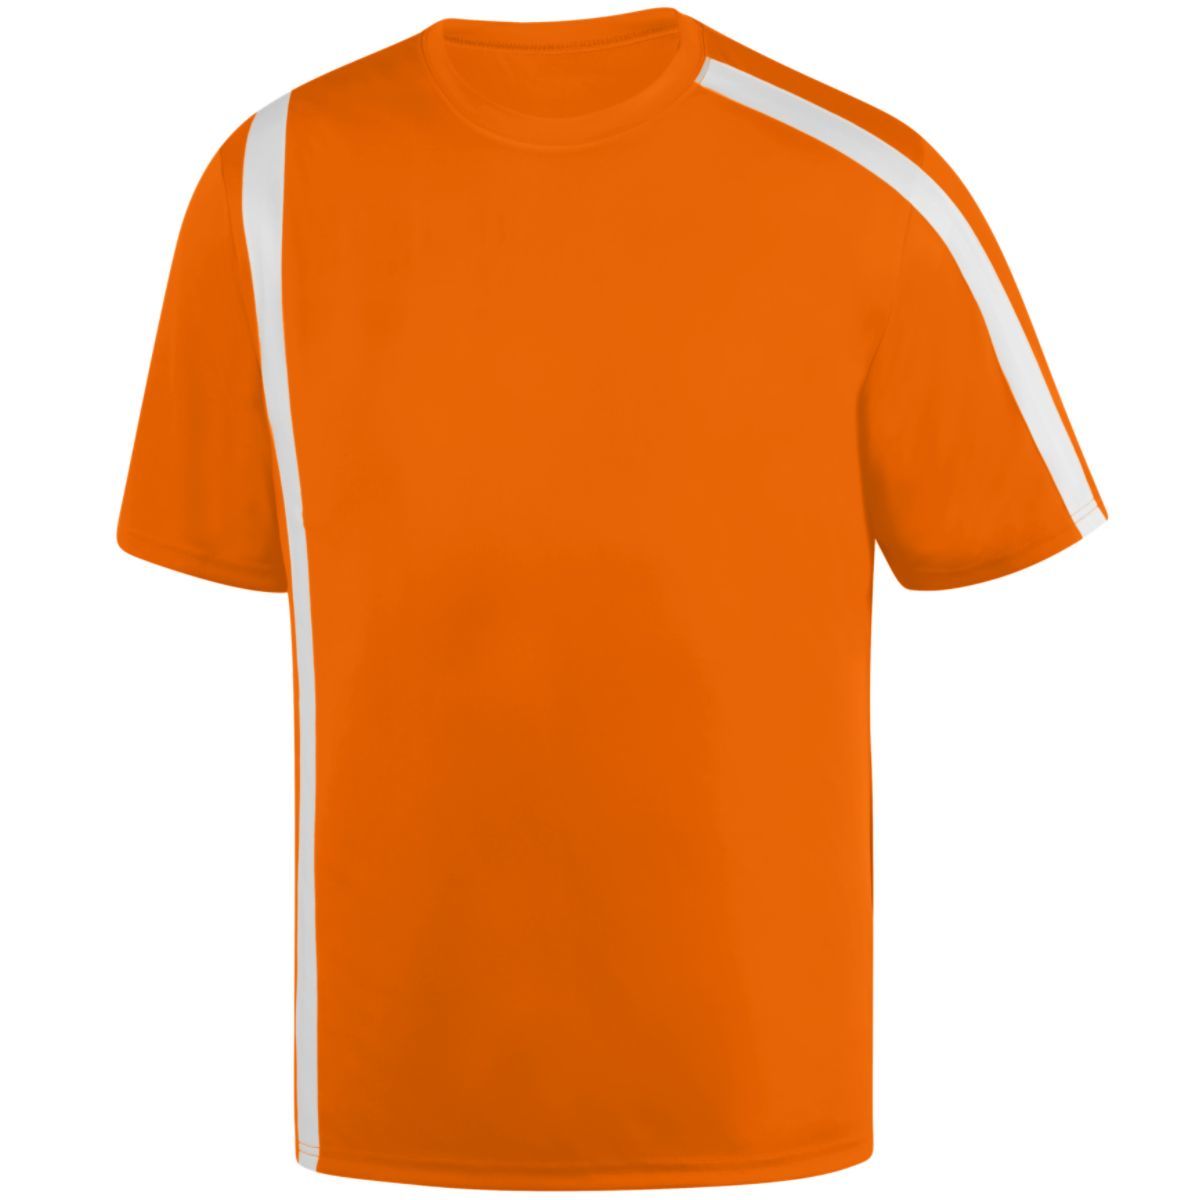 Augusta Sportswear Attacking Third Jersey in Power Orange/White  -Part of the Adult, Adult-Jersey, Augusta-Products, Soccer, Shirts, All-Sports-1 product lines at KanaleyCreations.com